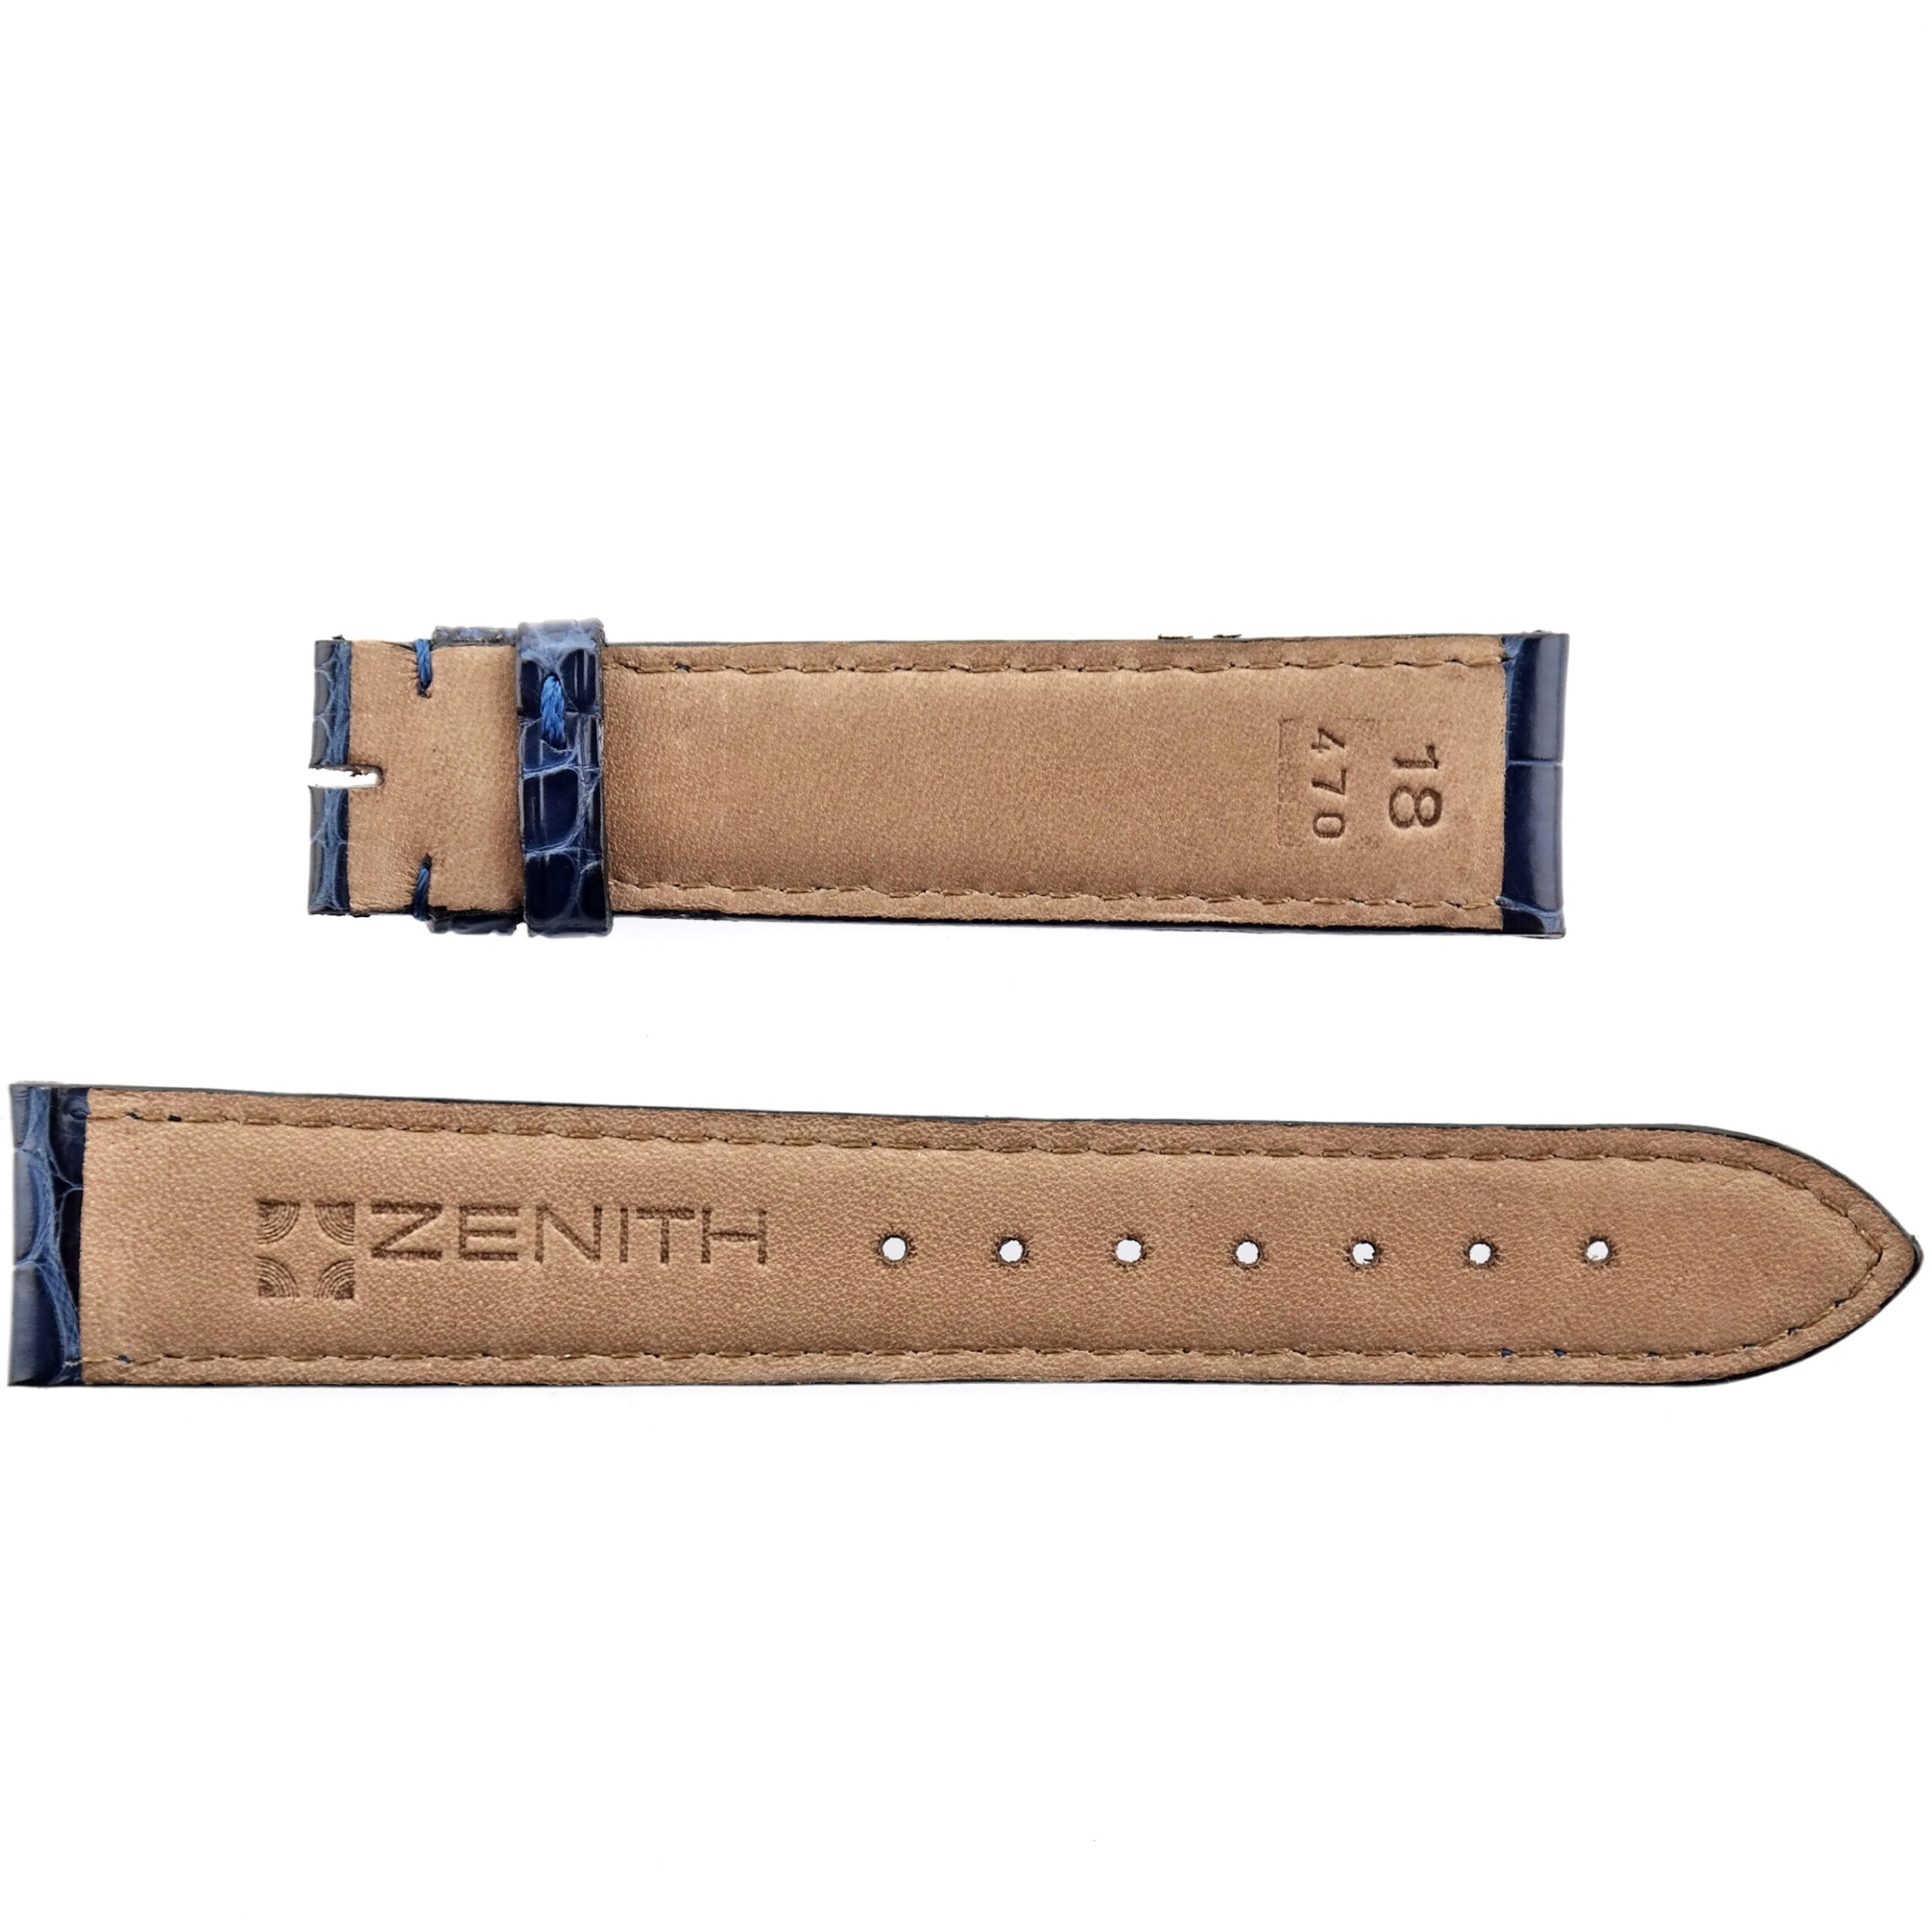 Authentic ZENITH - 18-470 - Leather Watch Strap - Swiss Made - 18 mm